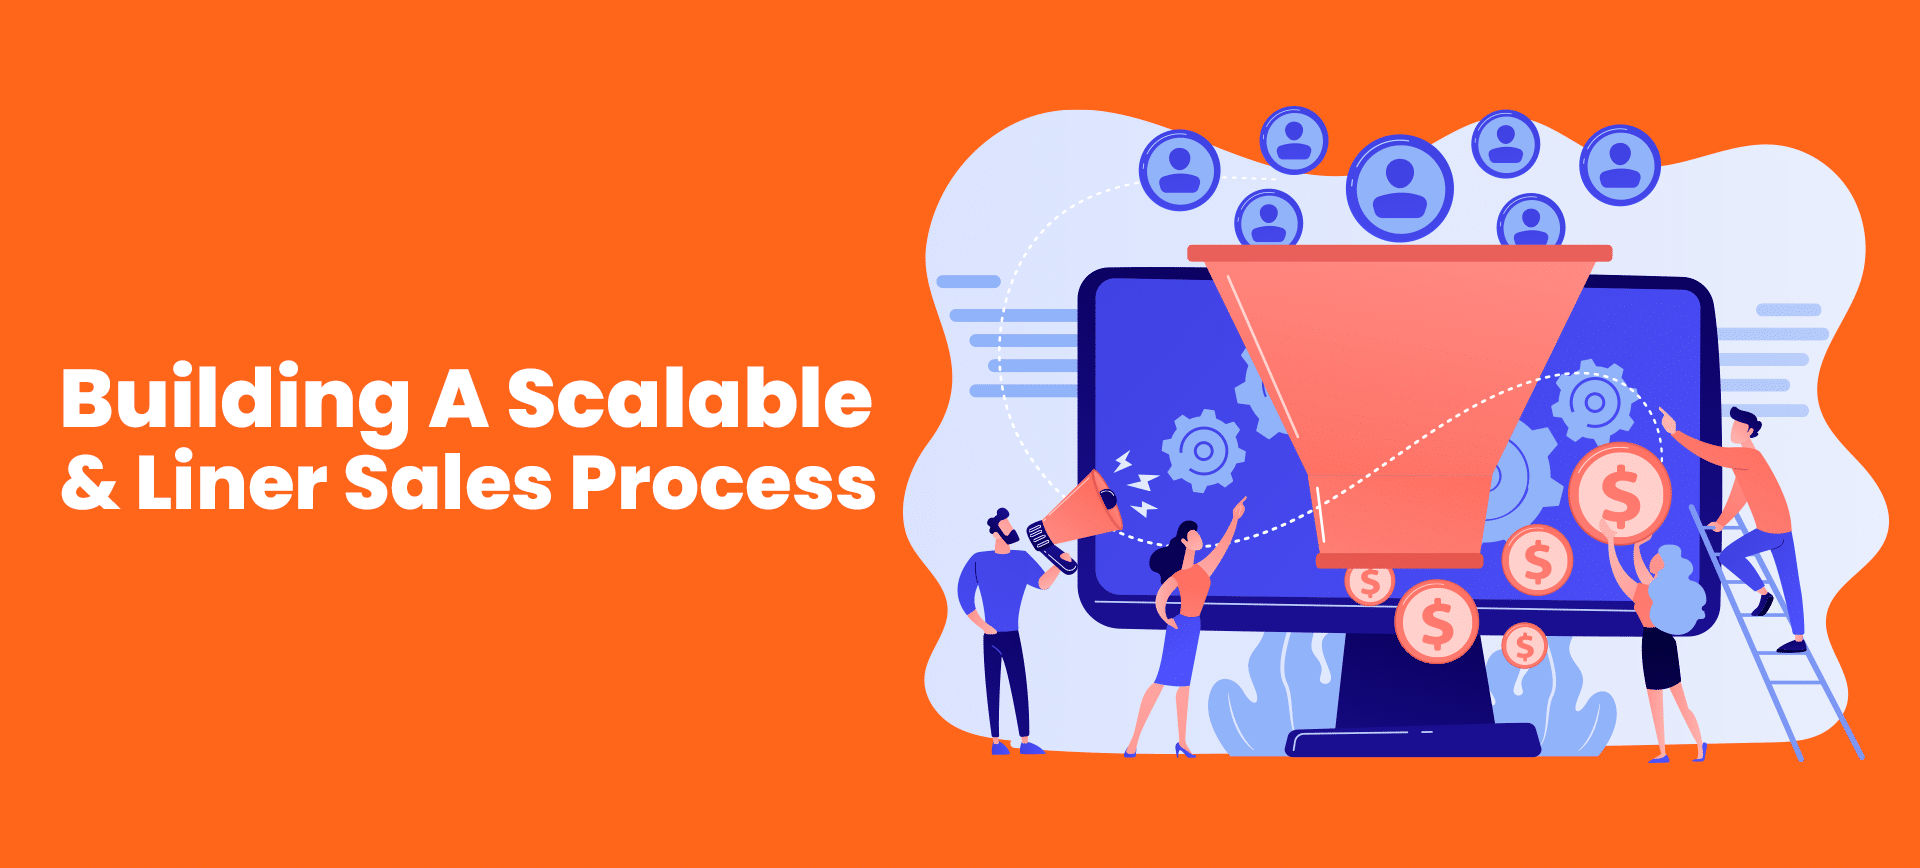 Building A Scalable & Linear Sales Process